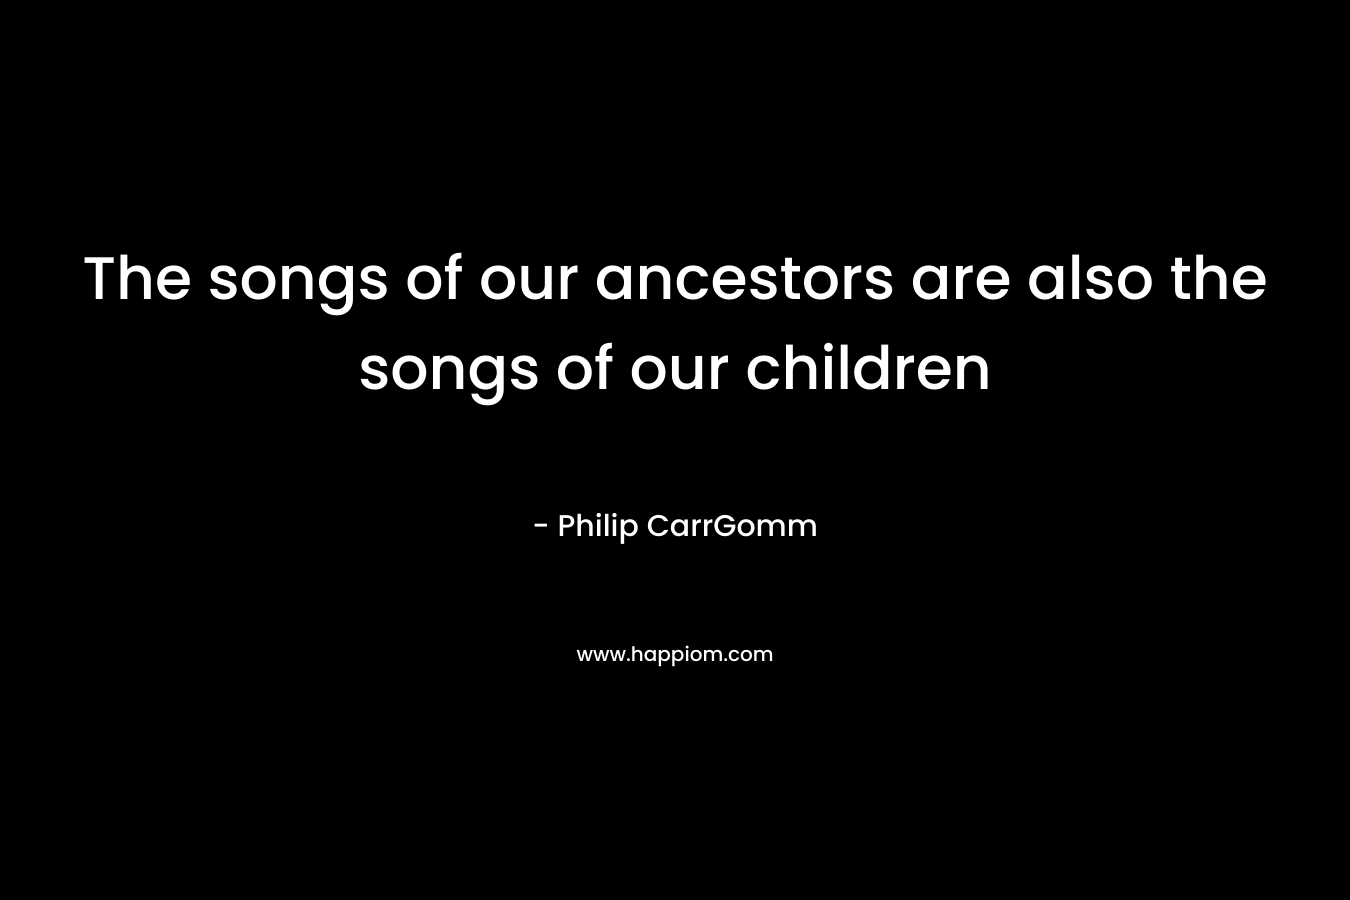 The songs of our ancestors are also the songs of our children